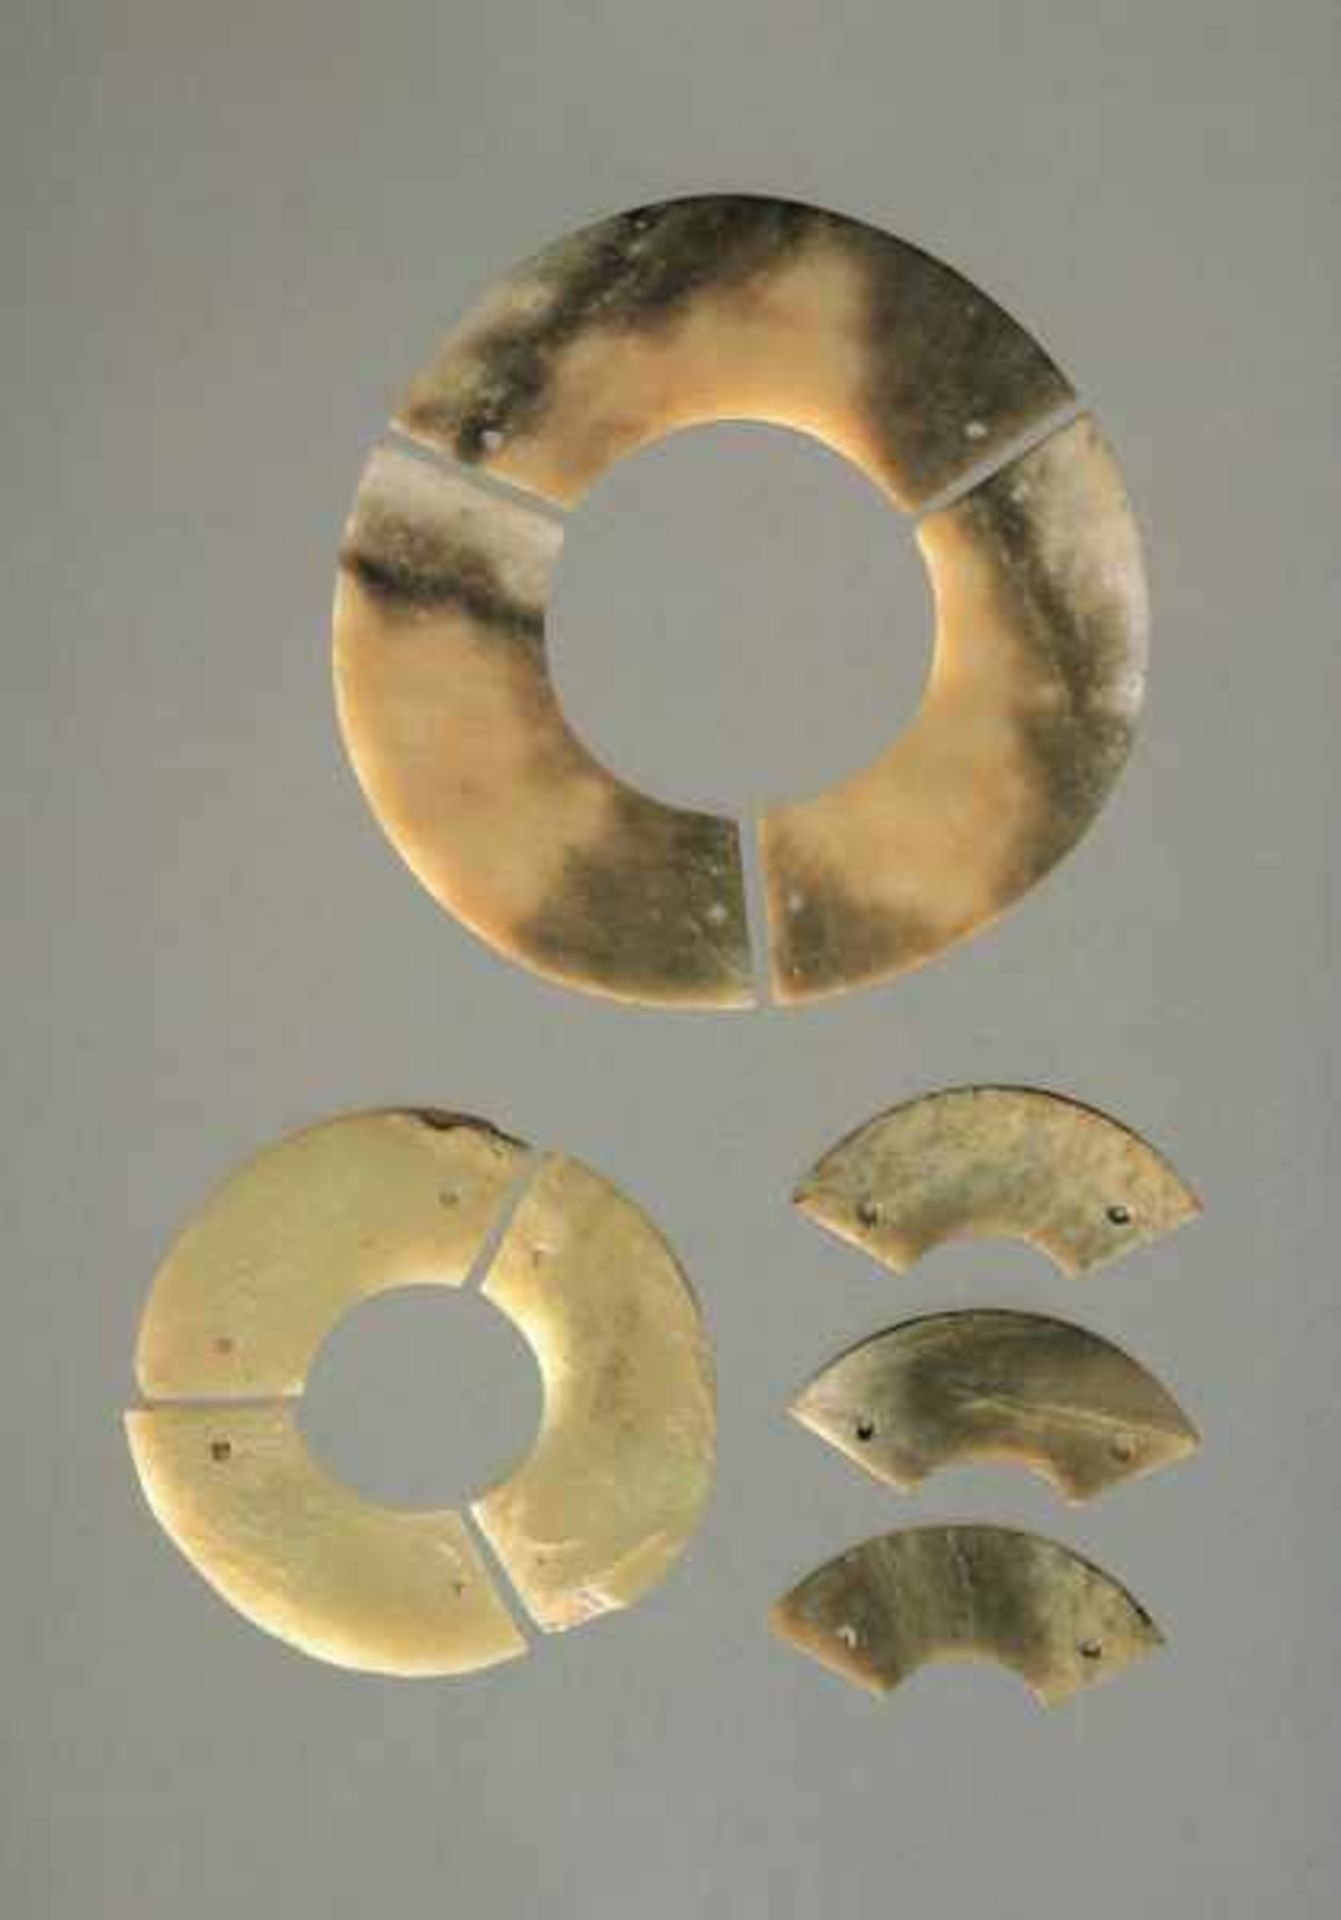 AN INTERESTING THREE-SECTION DISC CARVED IN MARBLE-LIKE JADE Jade. China, Early Bronze Age, Qijia - Image 5 of 5